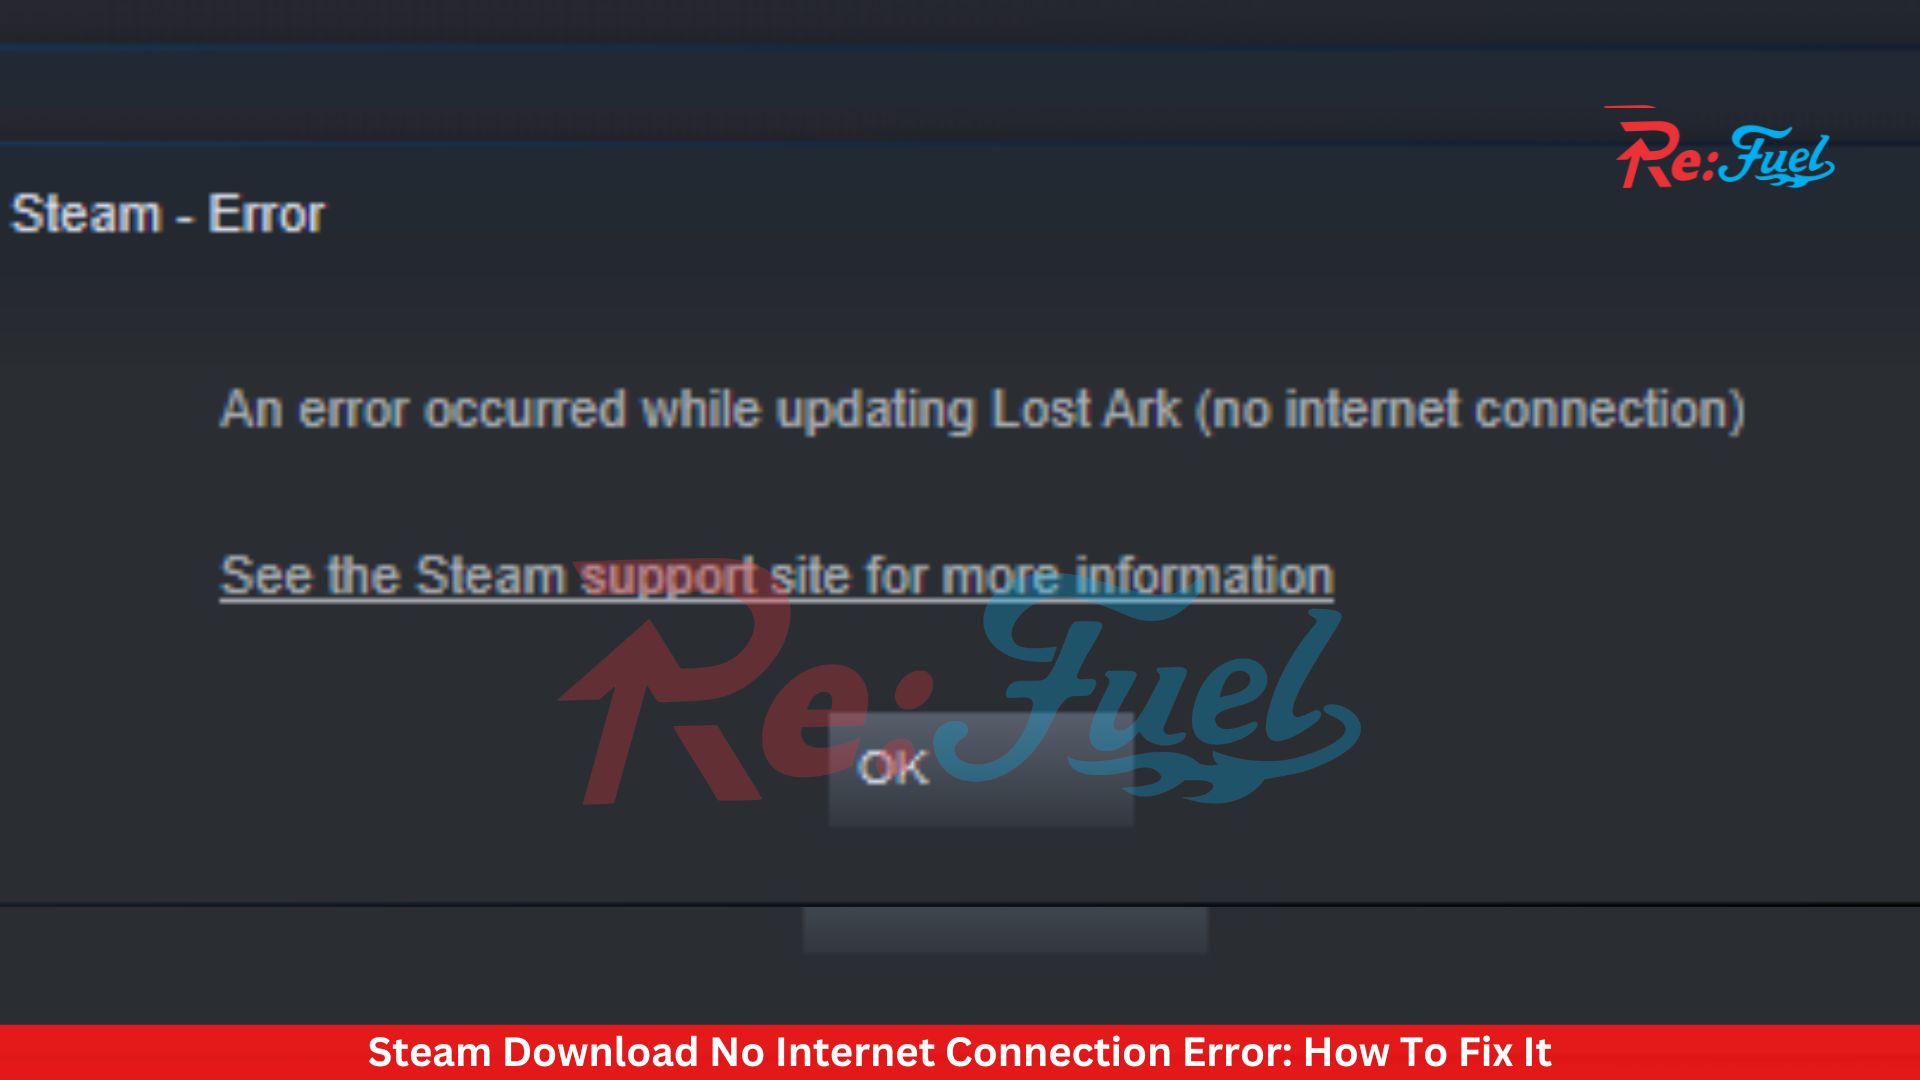 Steam is a famous digital distribution platform for video games that offer users access to a massive library of games from various publishers and developers. It also provides community features like forums, groups, and chat. However, many Steam users have reported encountering the "Steam Download No Internet Connection Error" when trying to download or update their games. This error message can be frustrating, especially when you have a stable internet connection and can't seem to figure out why the error persists.